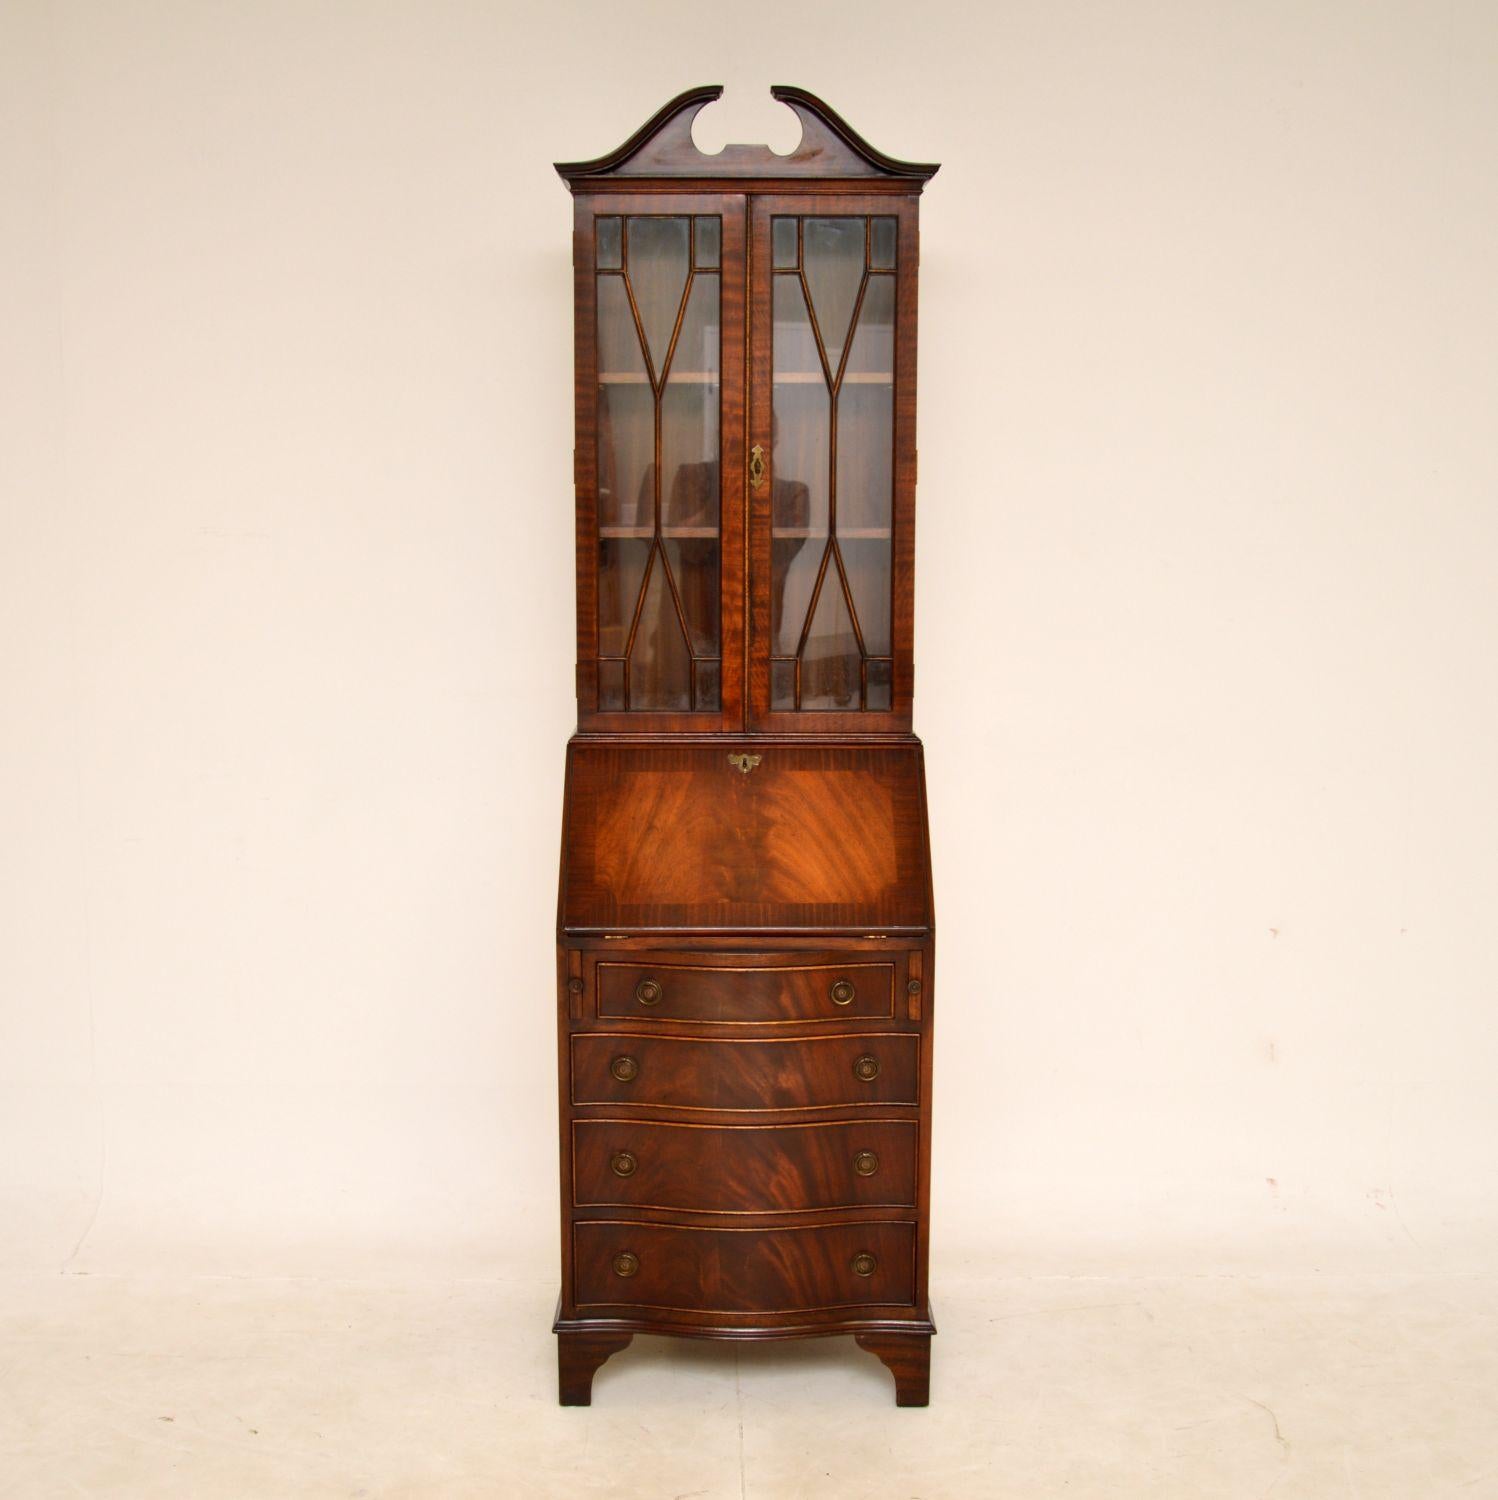 A smart and very well made antique bureau bookcase of very slim proportions. This is in the Georgian style, it was made in England and dates from around the 1950s.

It is of excellent quality, and is a most useful item. The drawer fronts are